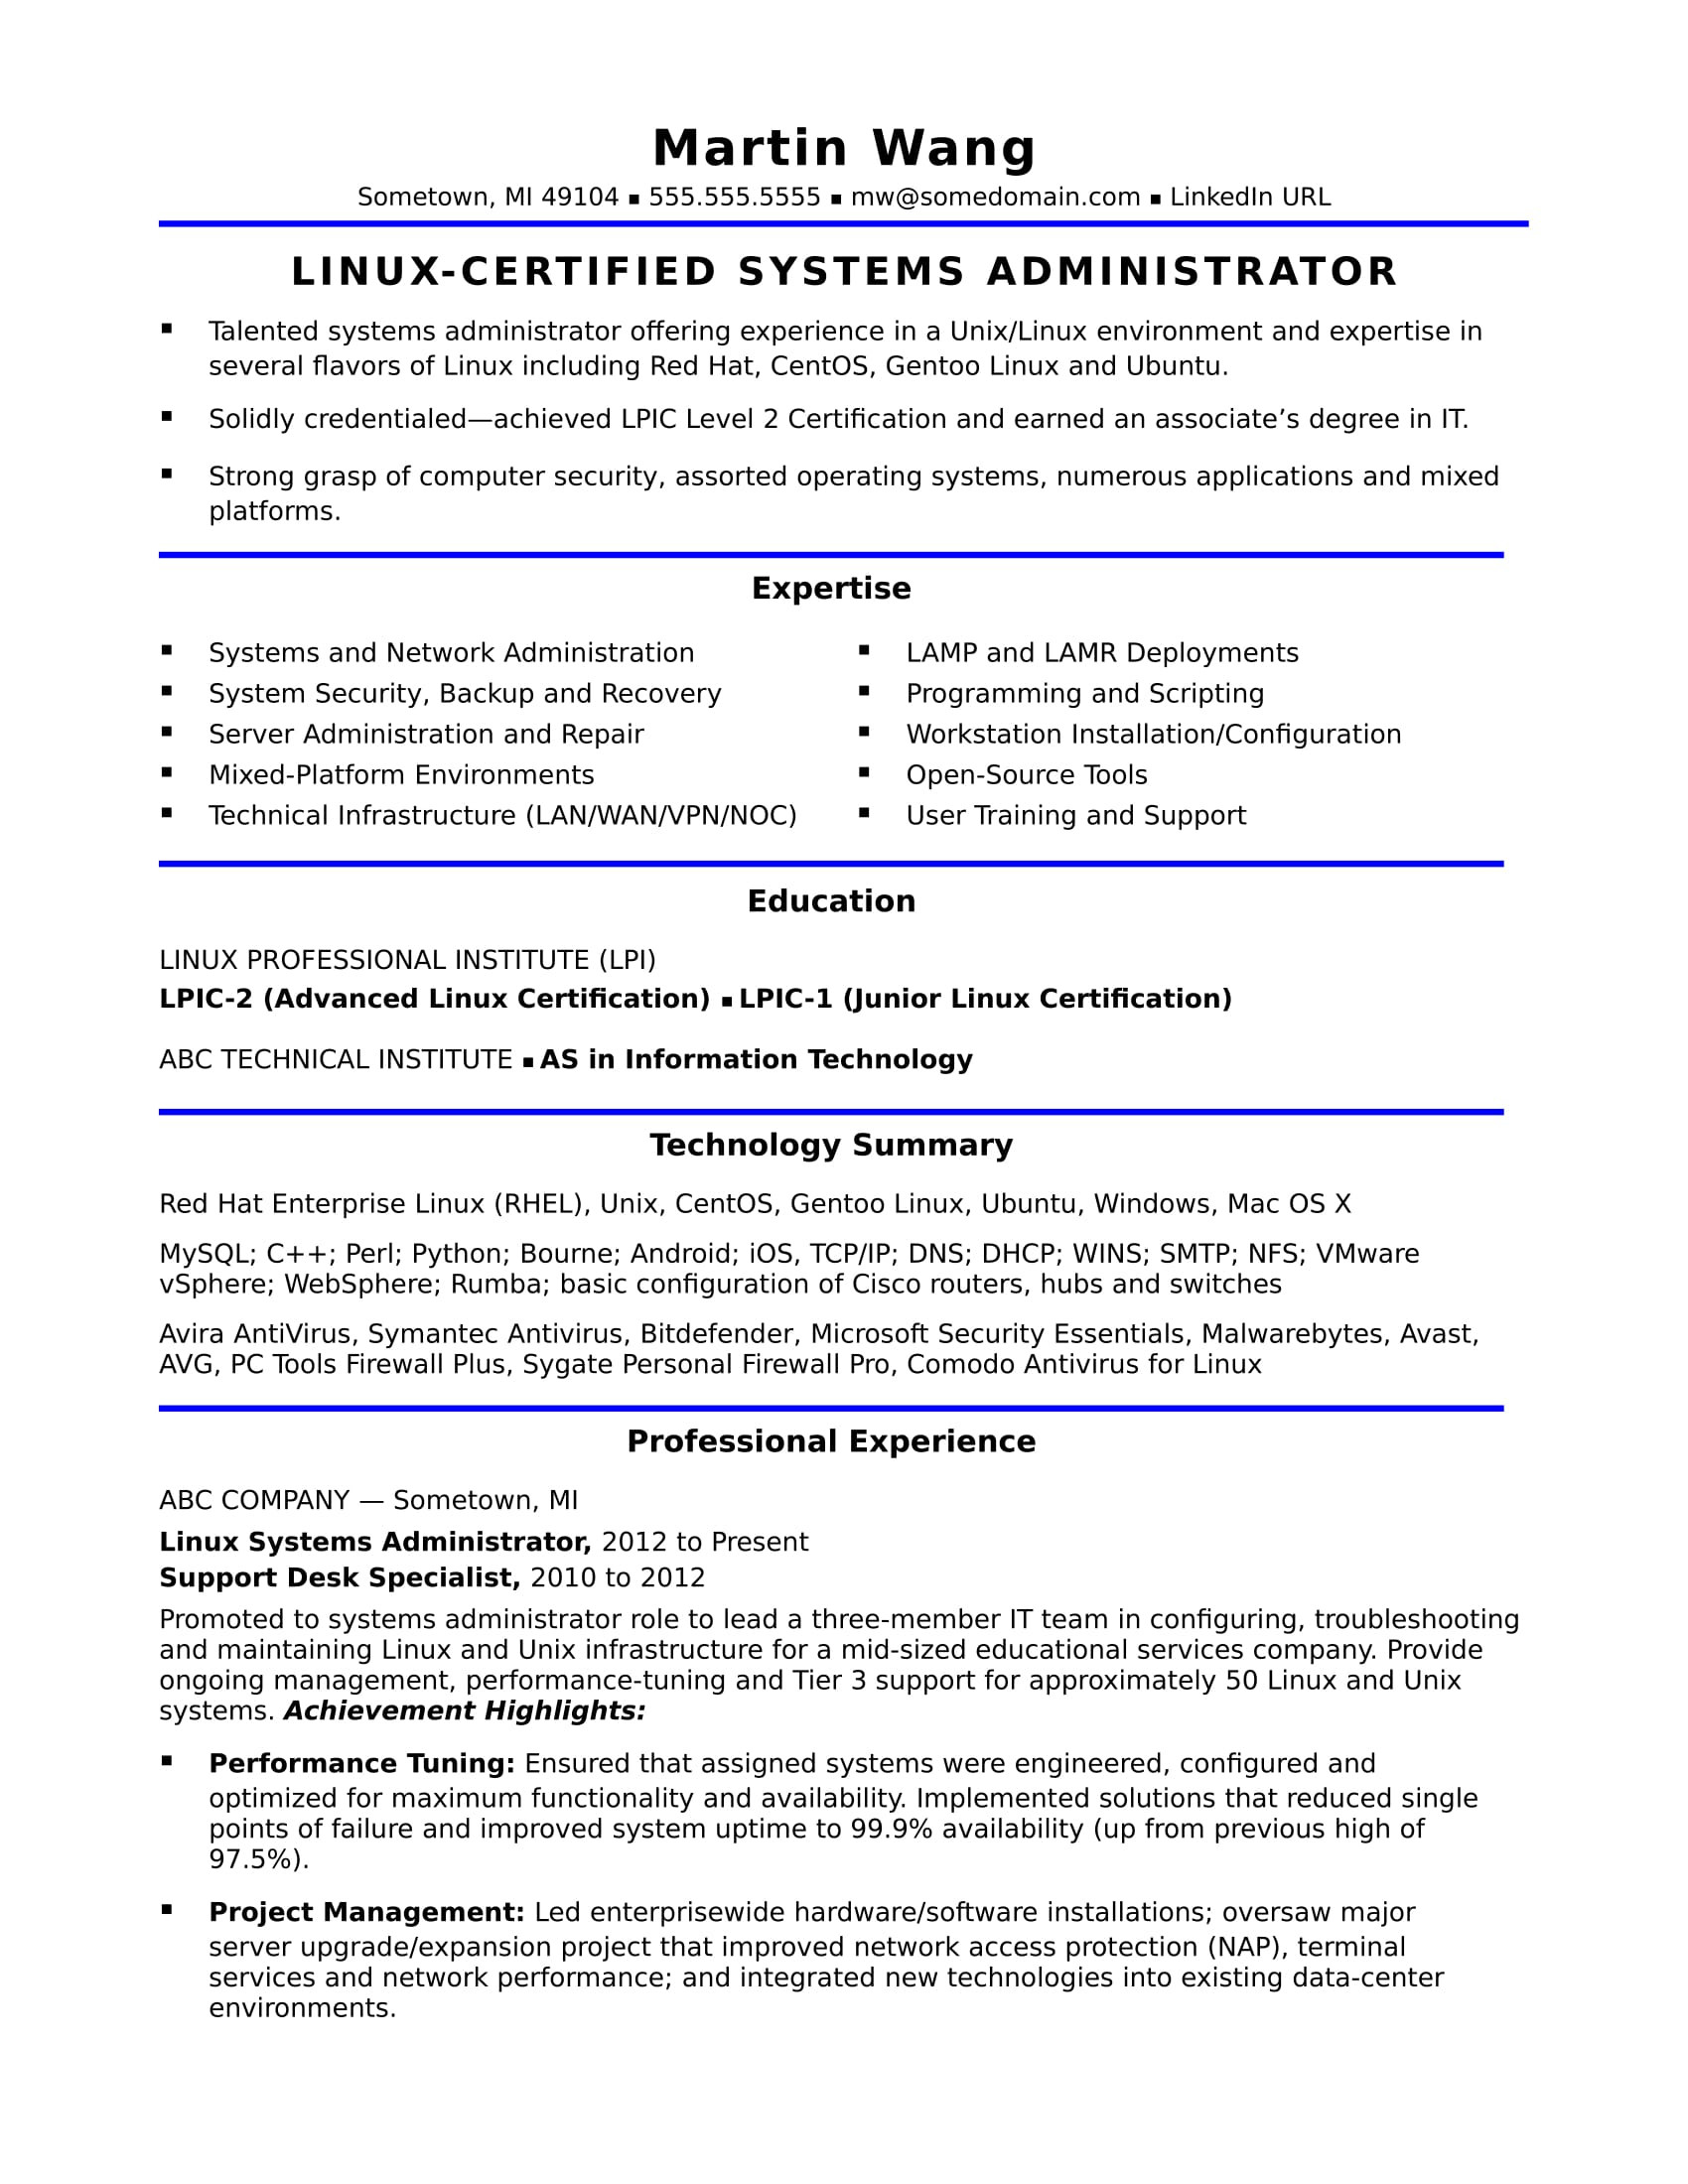 Resume Sample for Windows and Vmware Administrator Sample Resume for A Midlevel Systems Administrator Monster.com